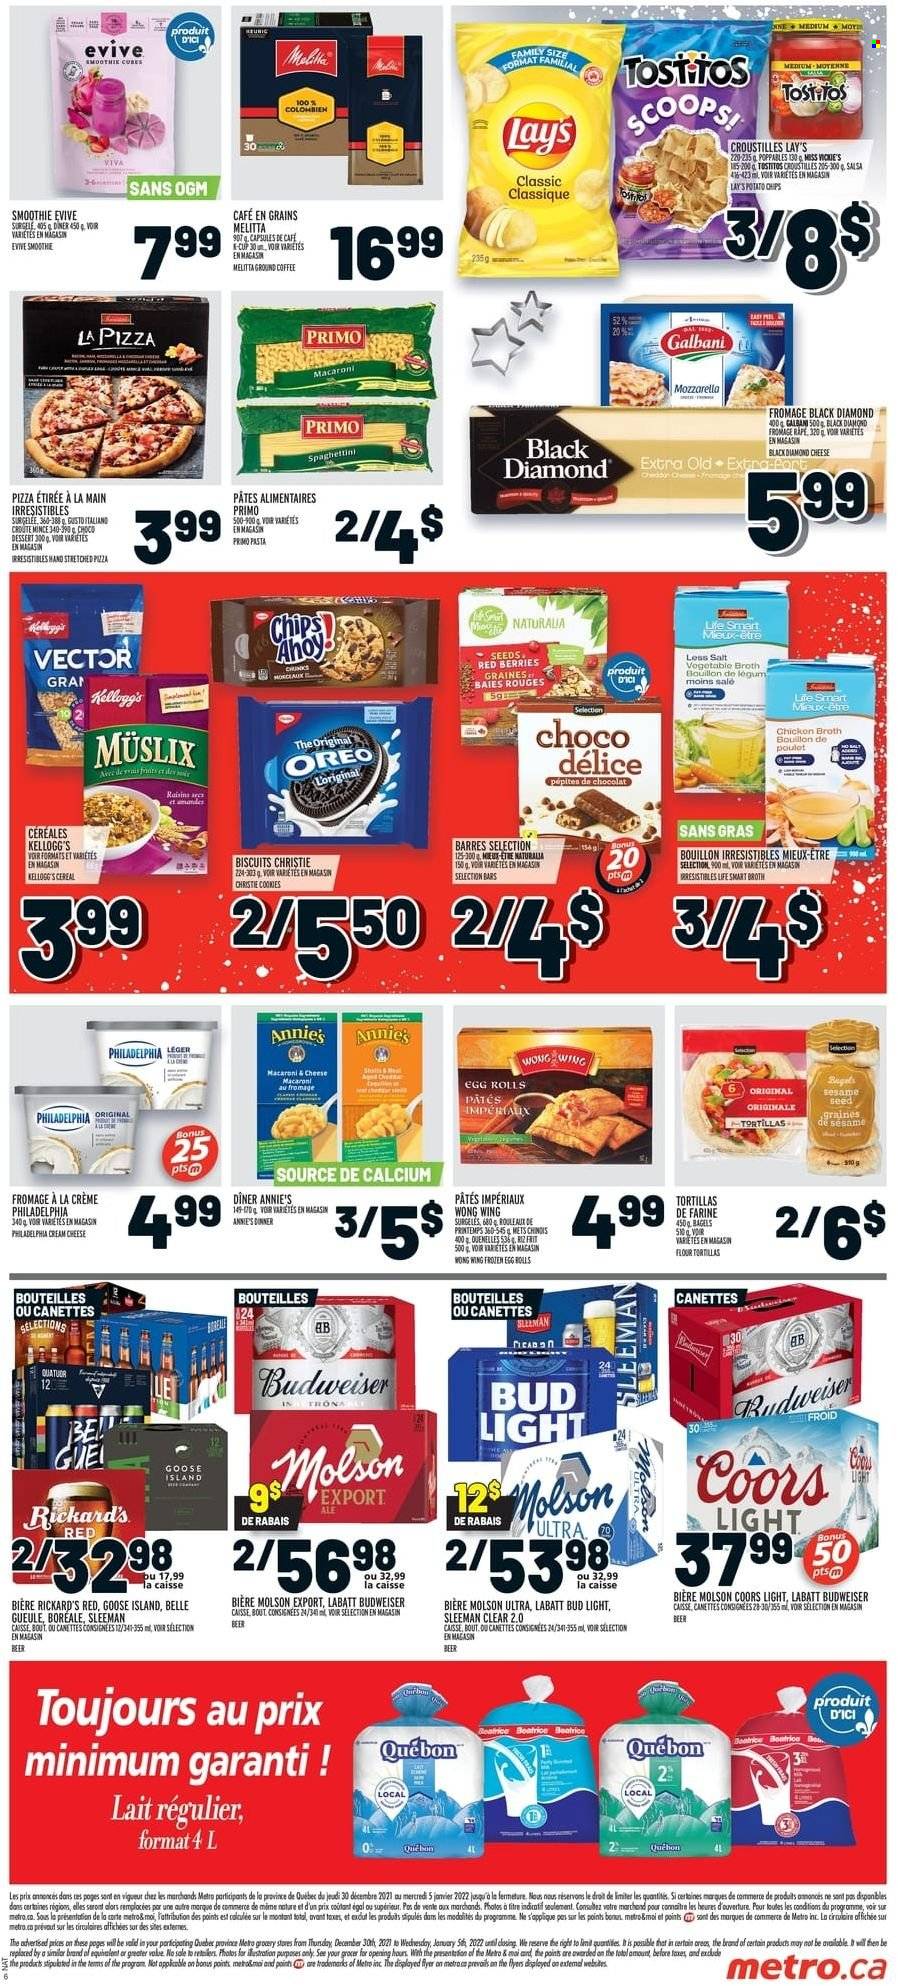 thumbnail - Metro Flyer - December 30, 2021 - January 05, 2022 - Sales products - bagels, tortillas, pizza, macaroni, pasta, egg rolls, Annie's, Galbani, cookies, Kellogg's, biscuit, potato chips, Lay’s, Tostitos, bouillon, sesame seed, salt, broth, cereals, salsa, dried fruit, smoothie, coffee, ground coffee, beer, Bud Light, Oreo, Budweiser, calcium, raisins, Philadelphia, Coors. Page 2.